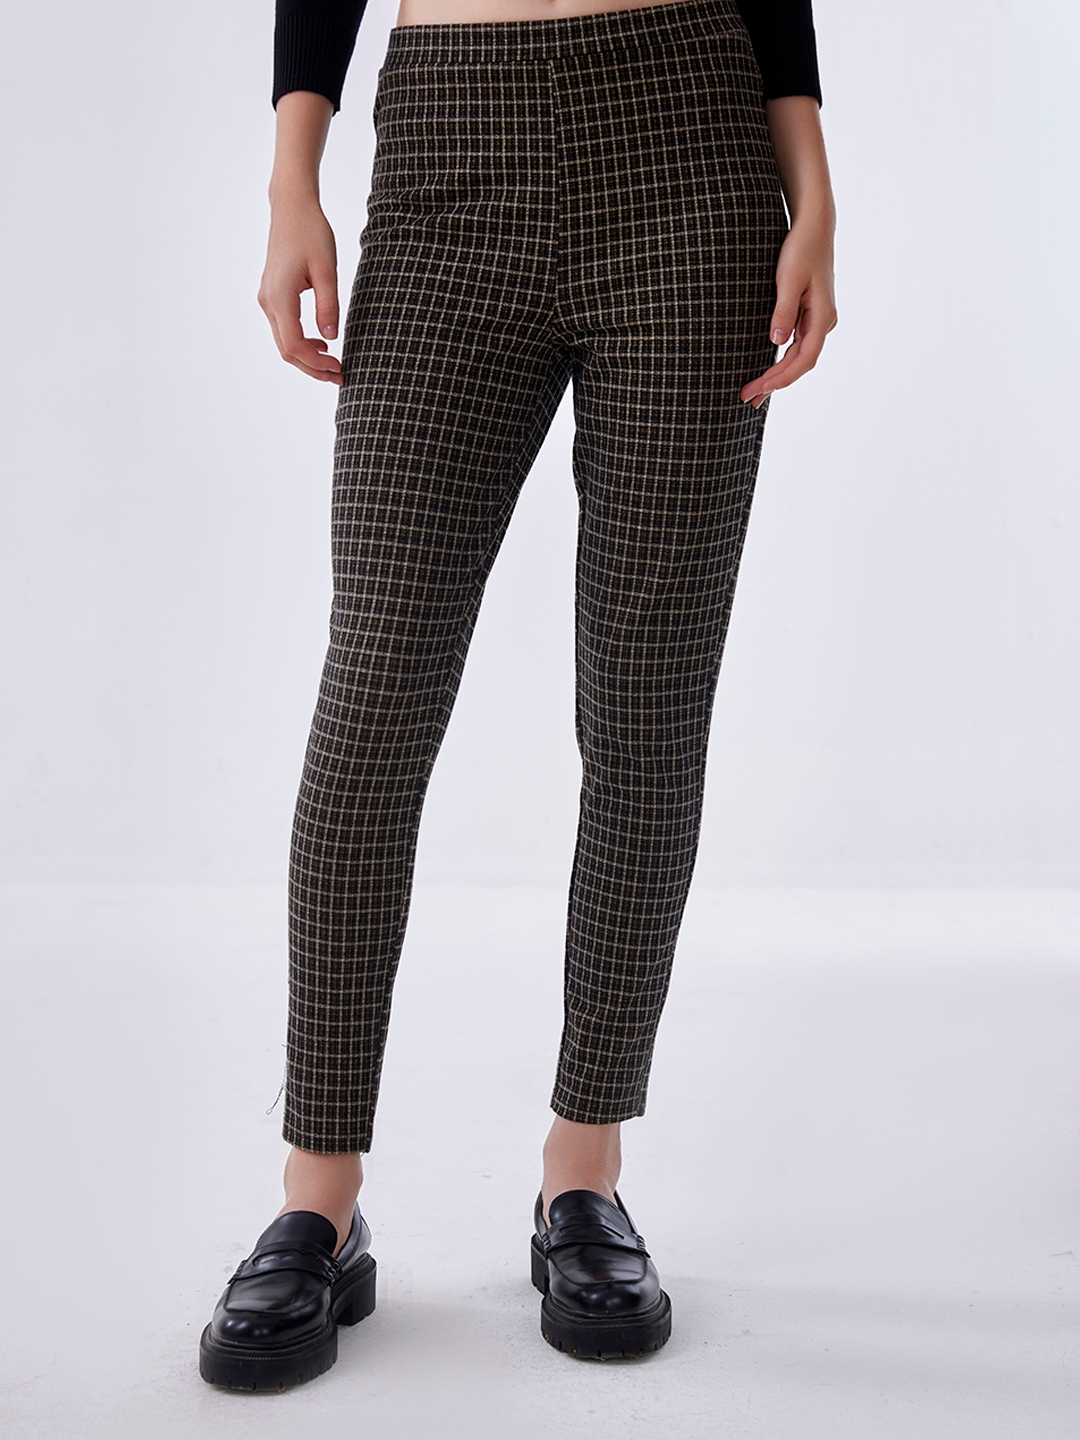 House of Cavani Hardy Navy Check Slim Fit Trousers - Clothing from House Of  Cavani UK